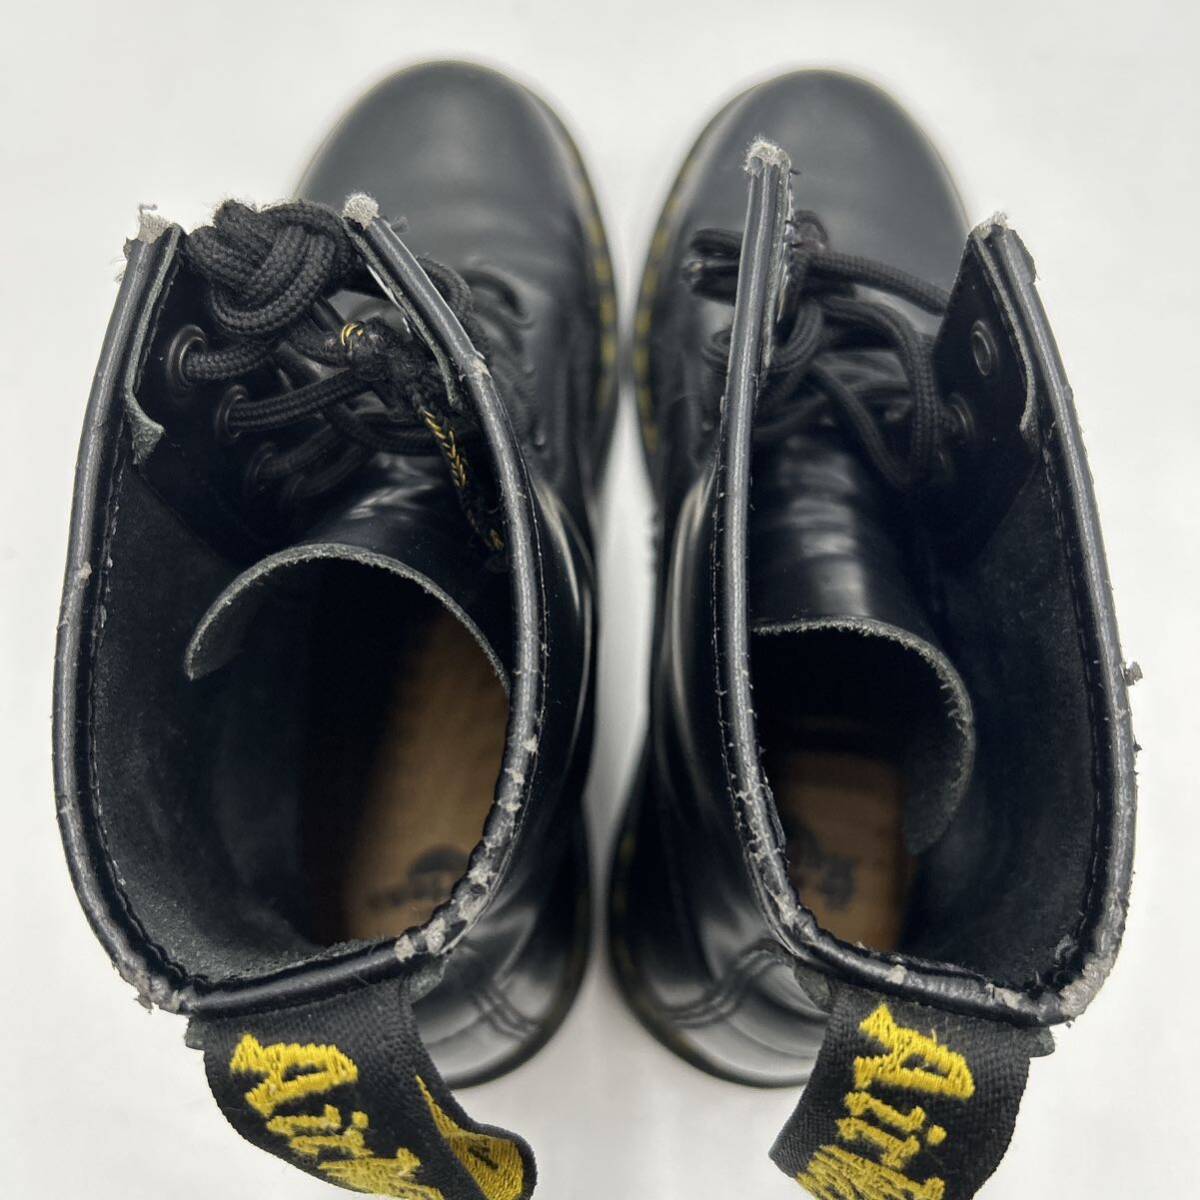 F #.. was done design \' popular yellow stitch \' Dr.Martens Dr. Martens original leather 8EYE race up boots leather shoes UK6 25cm gentleman shoes 